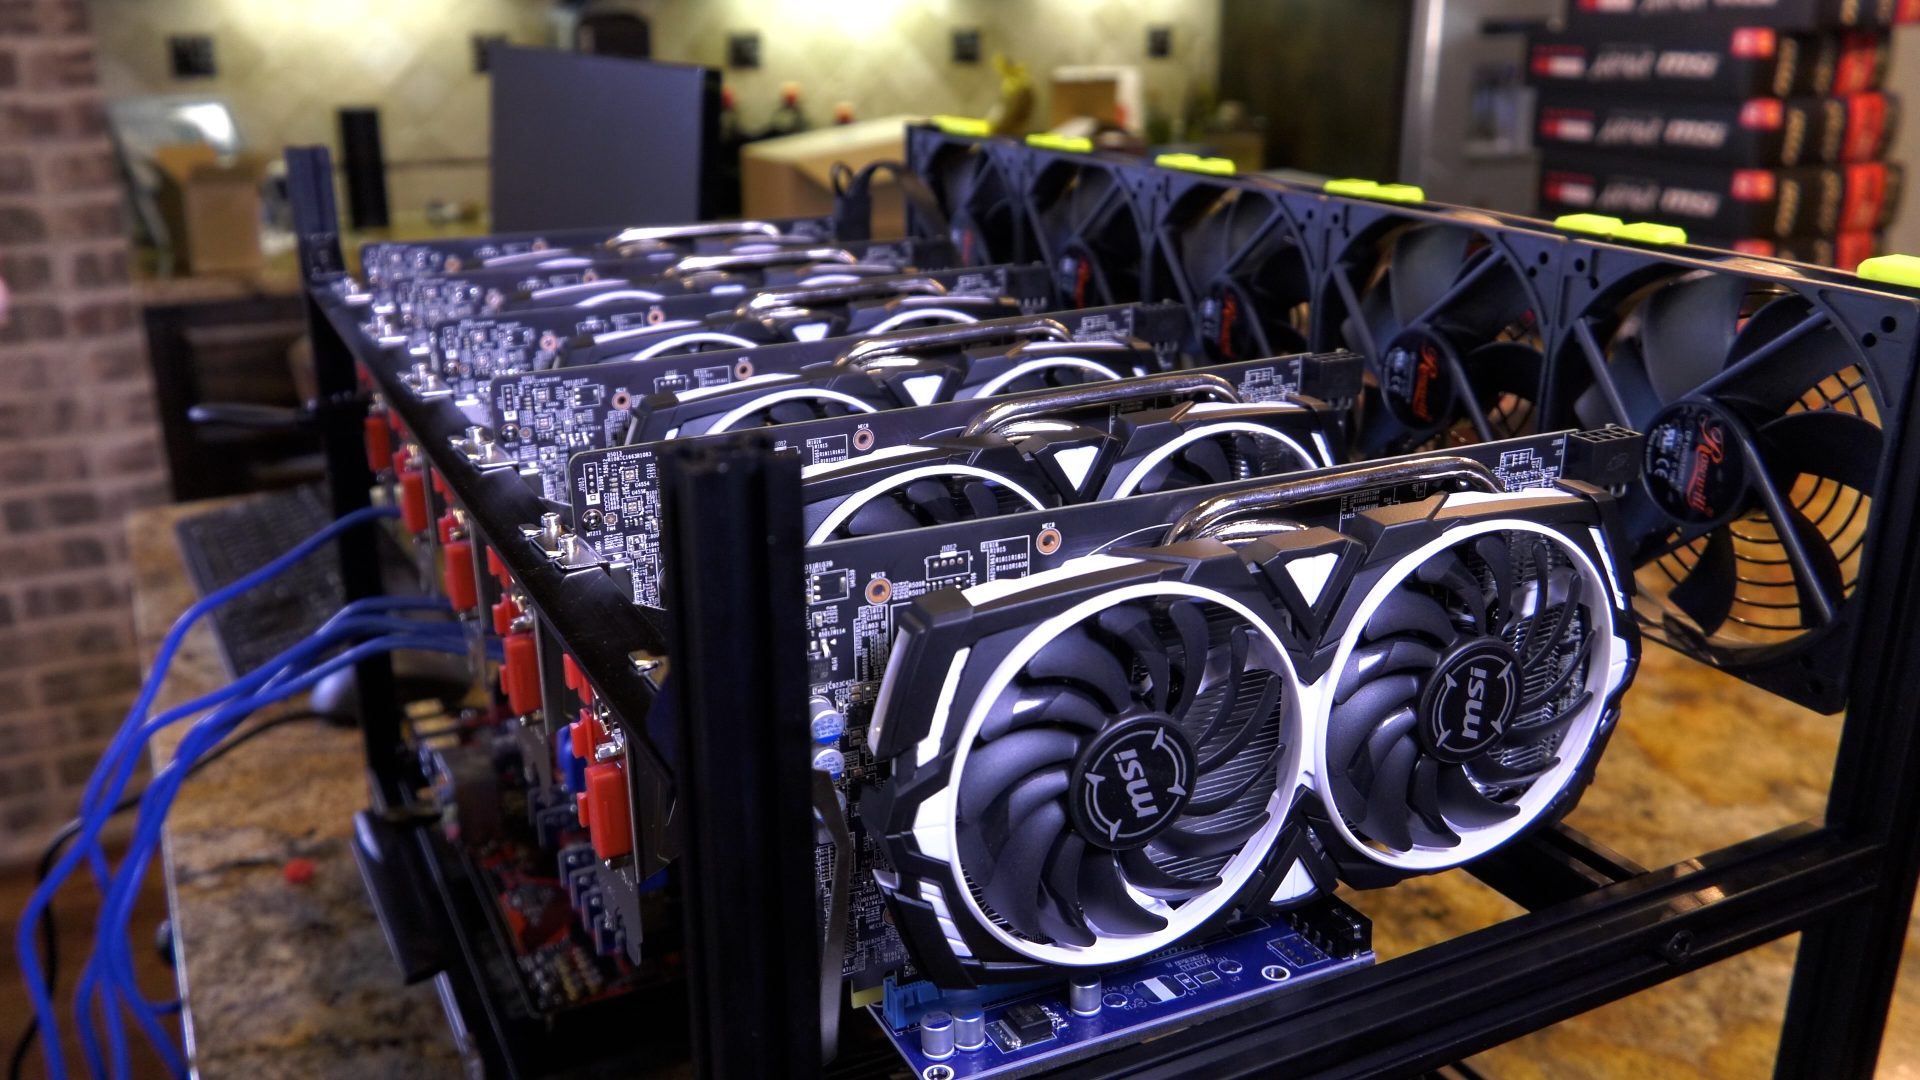 Chinese crypto mining rigs look for alternatives after China cracks the whip on cryptocurrency